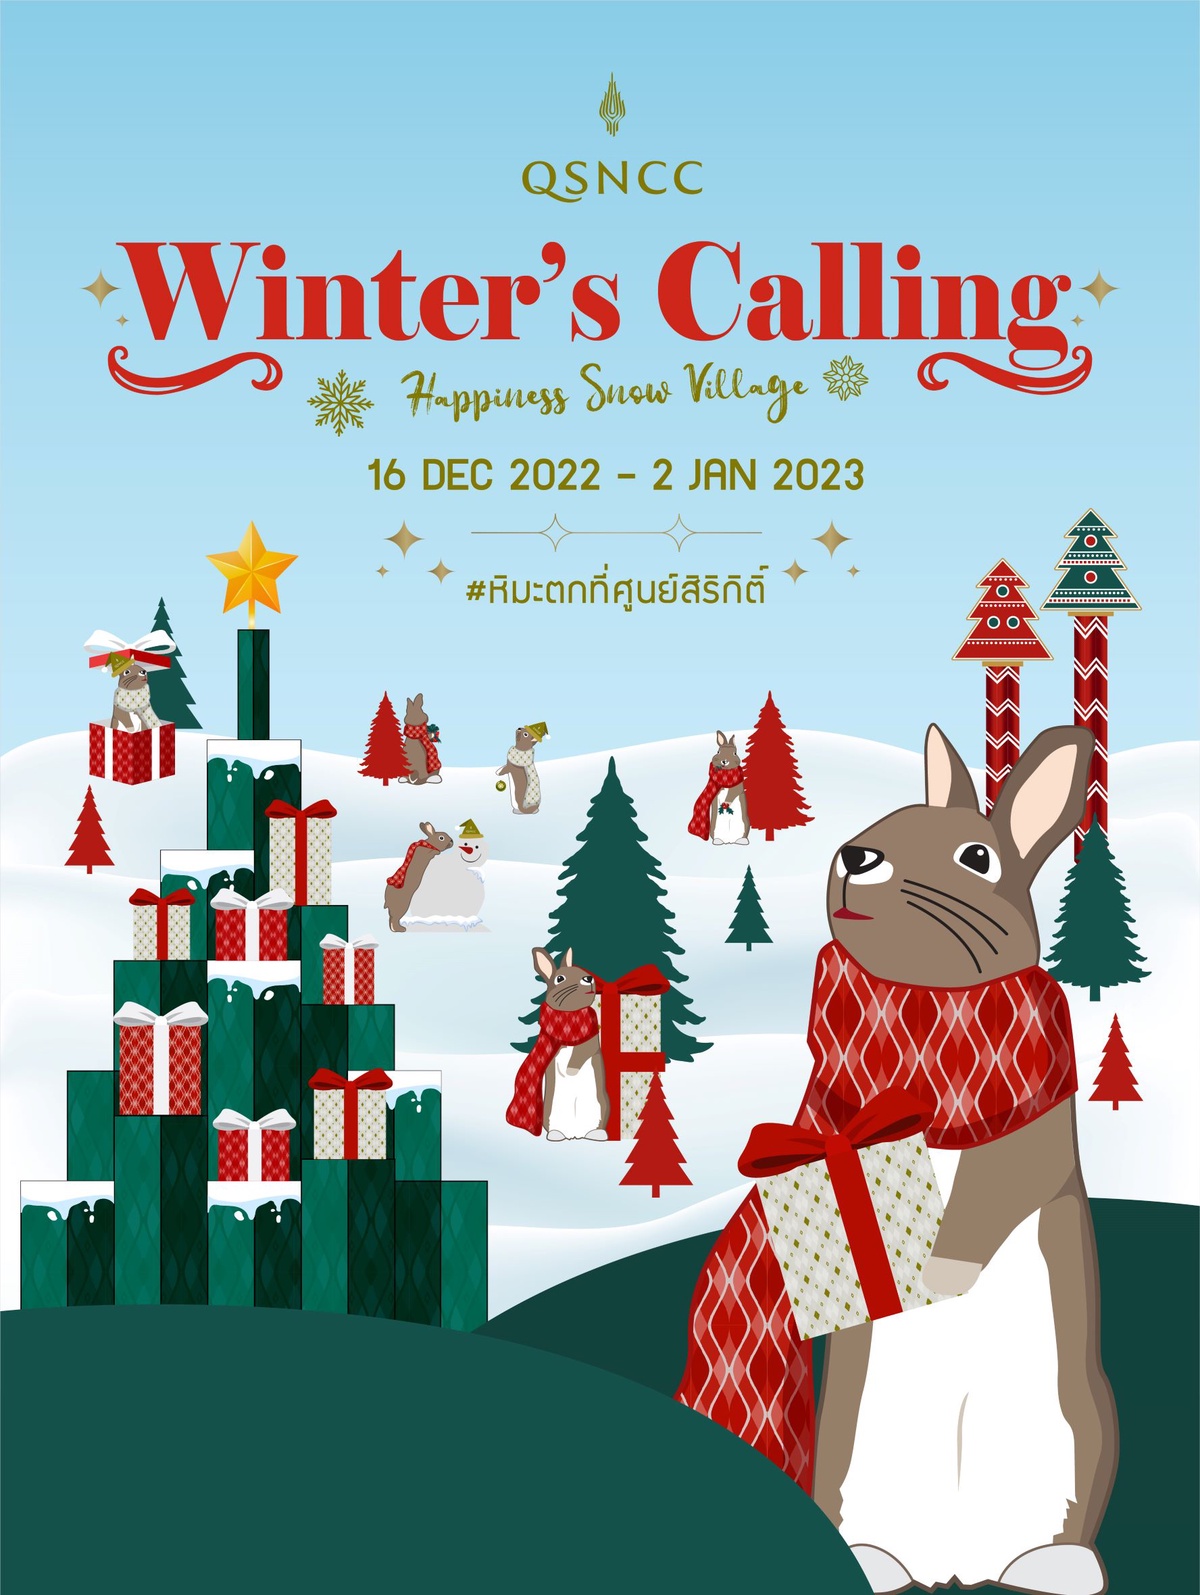 Winter's Calling! Let's Celebrate White Christmas at QSNCC